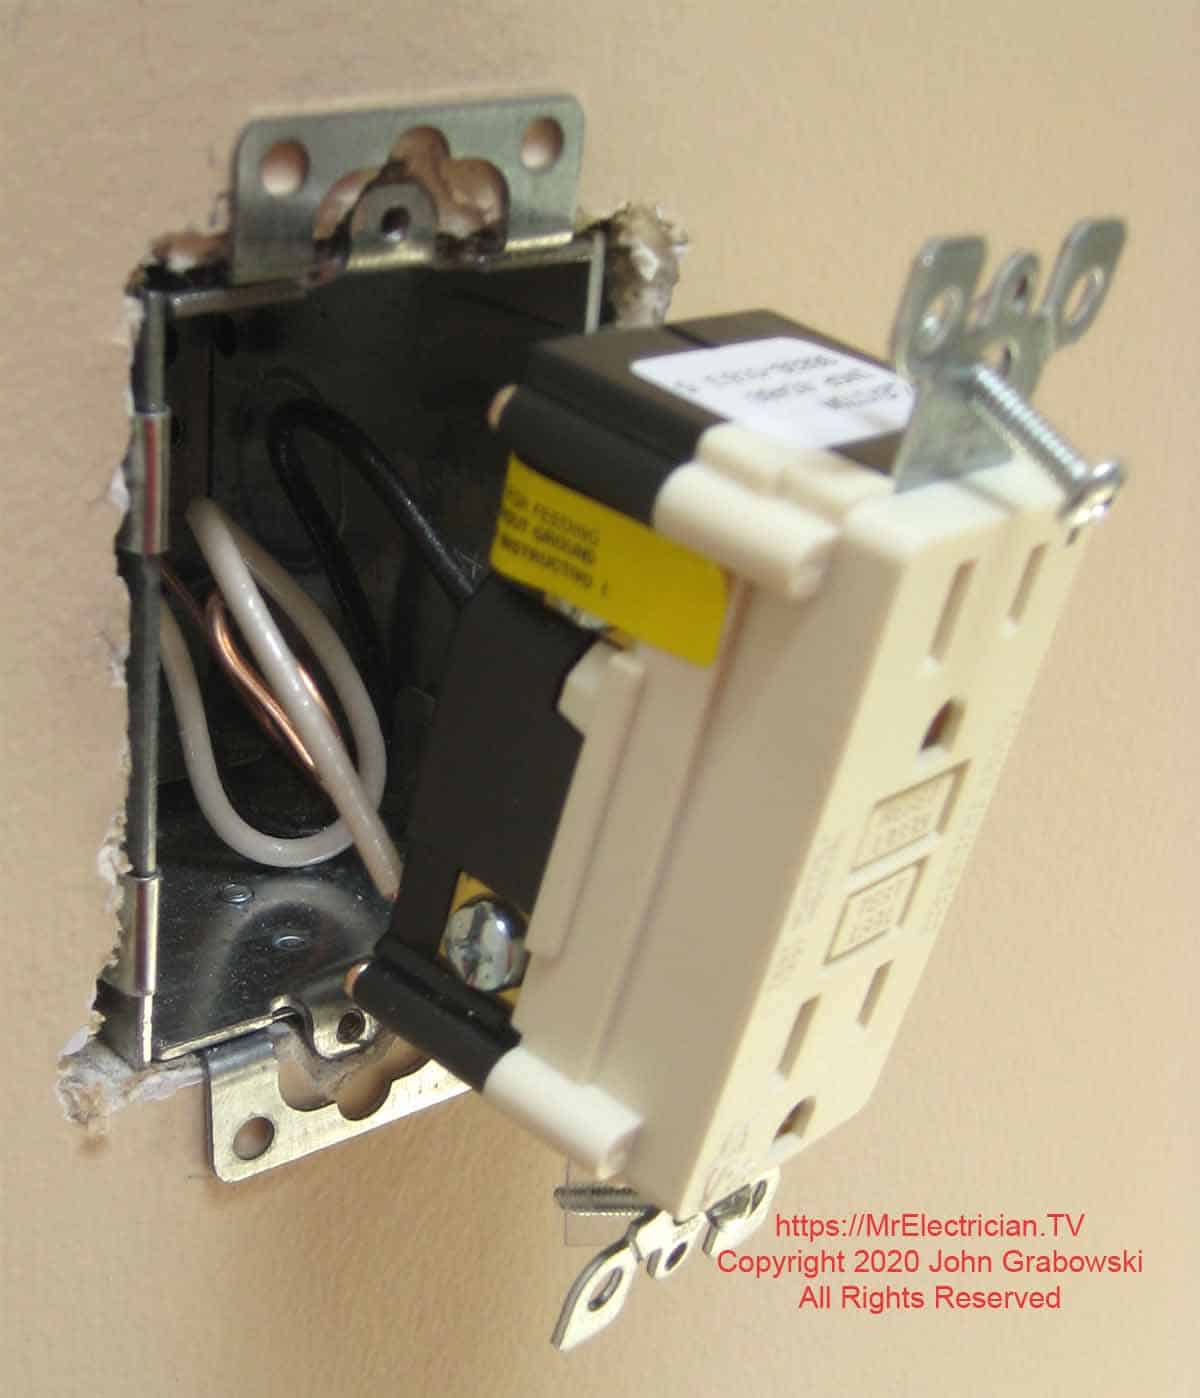 GFCI outlet ready for insertion into electrical box in the wall